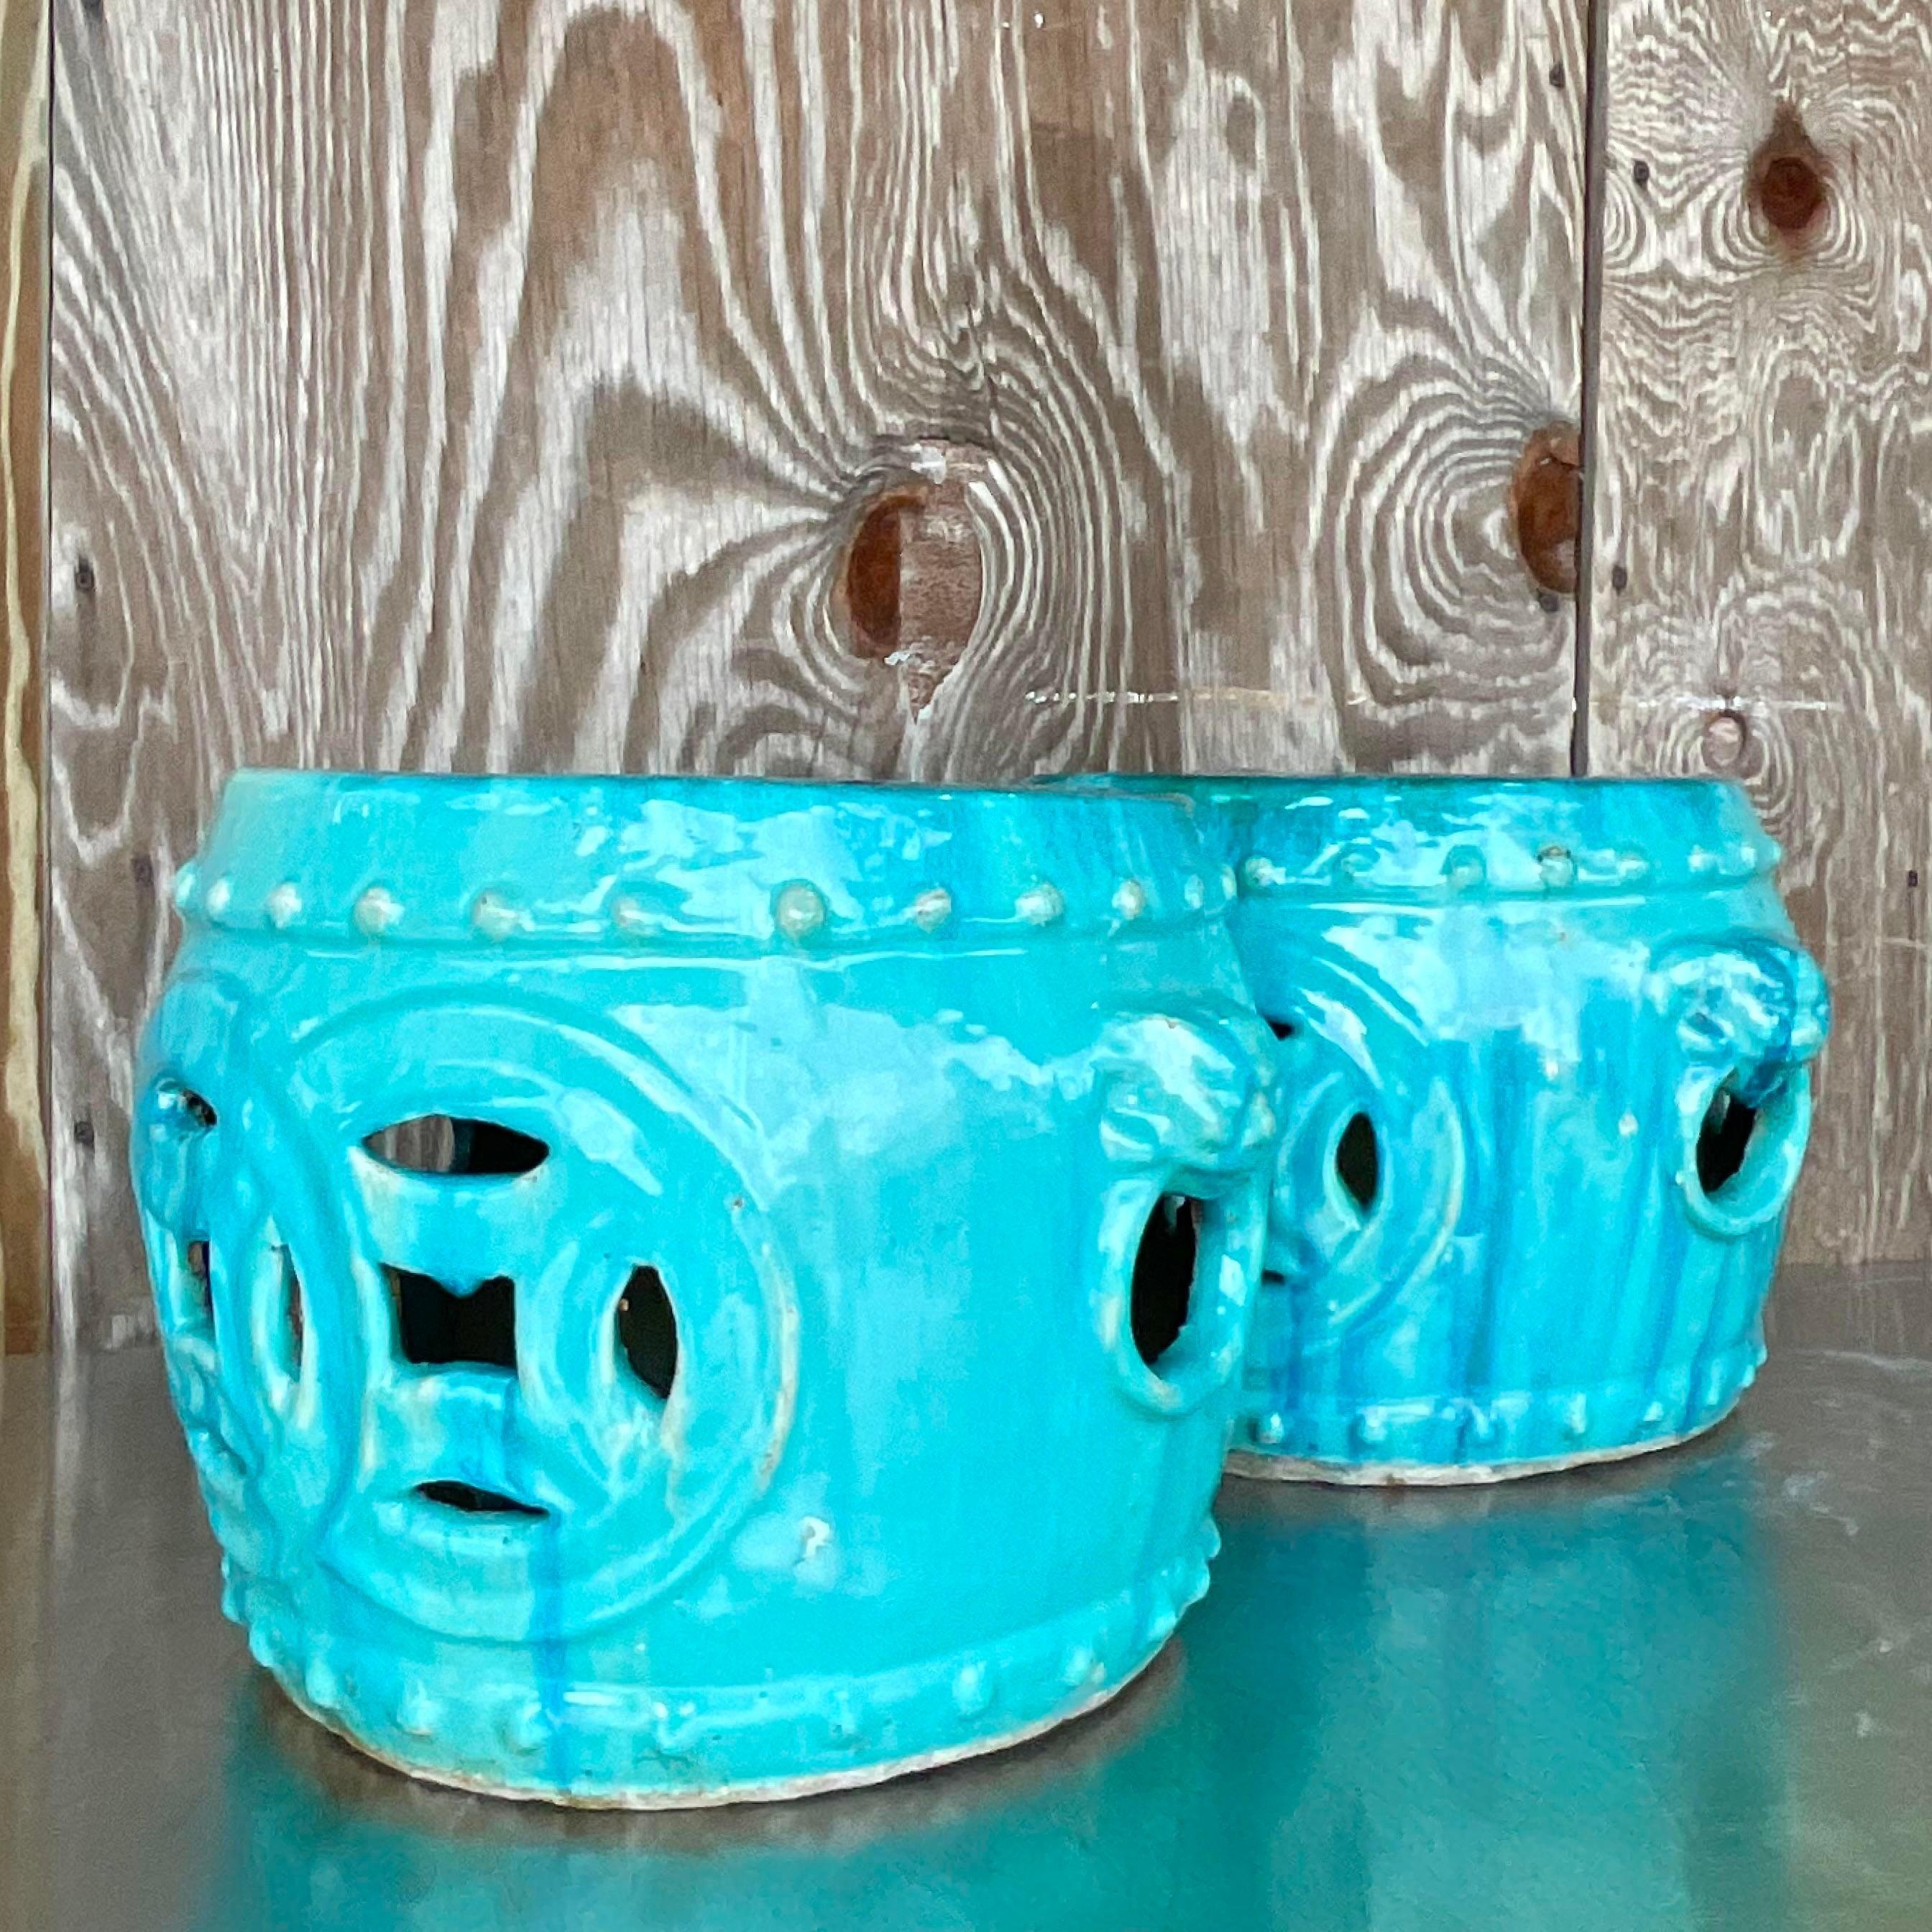 American Vintage Boho Glazed Ceramic Low Stools - a Pair For Sale